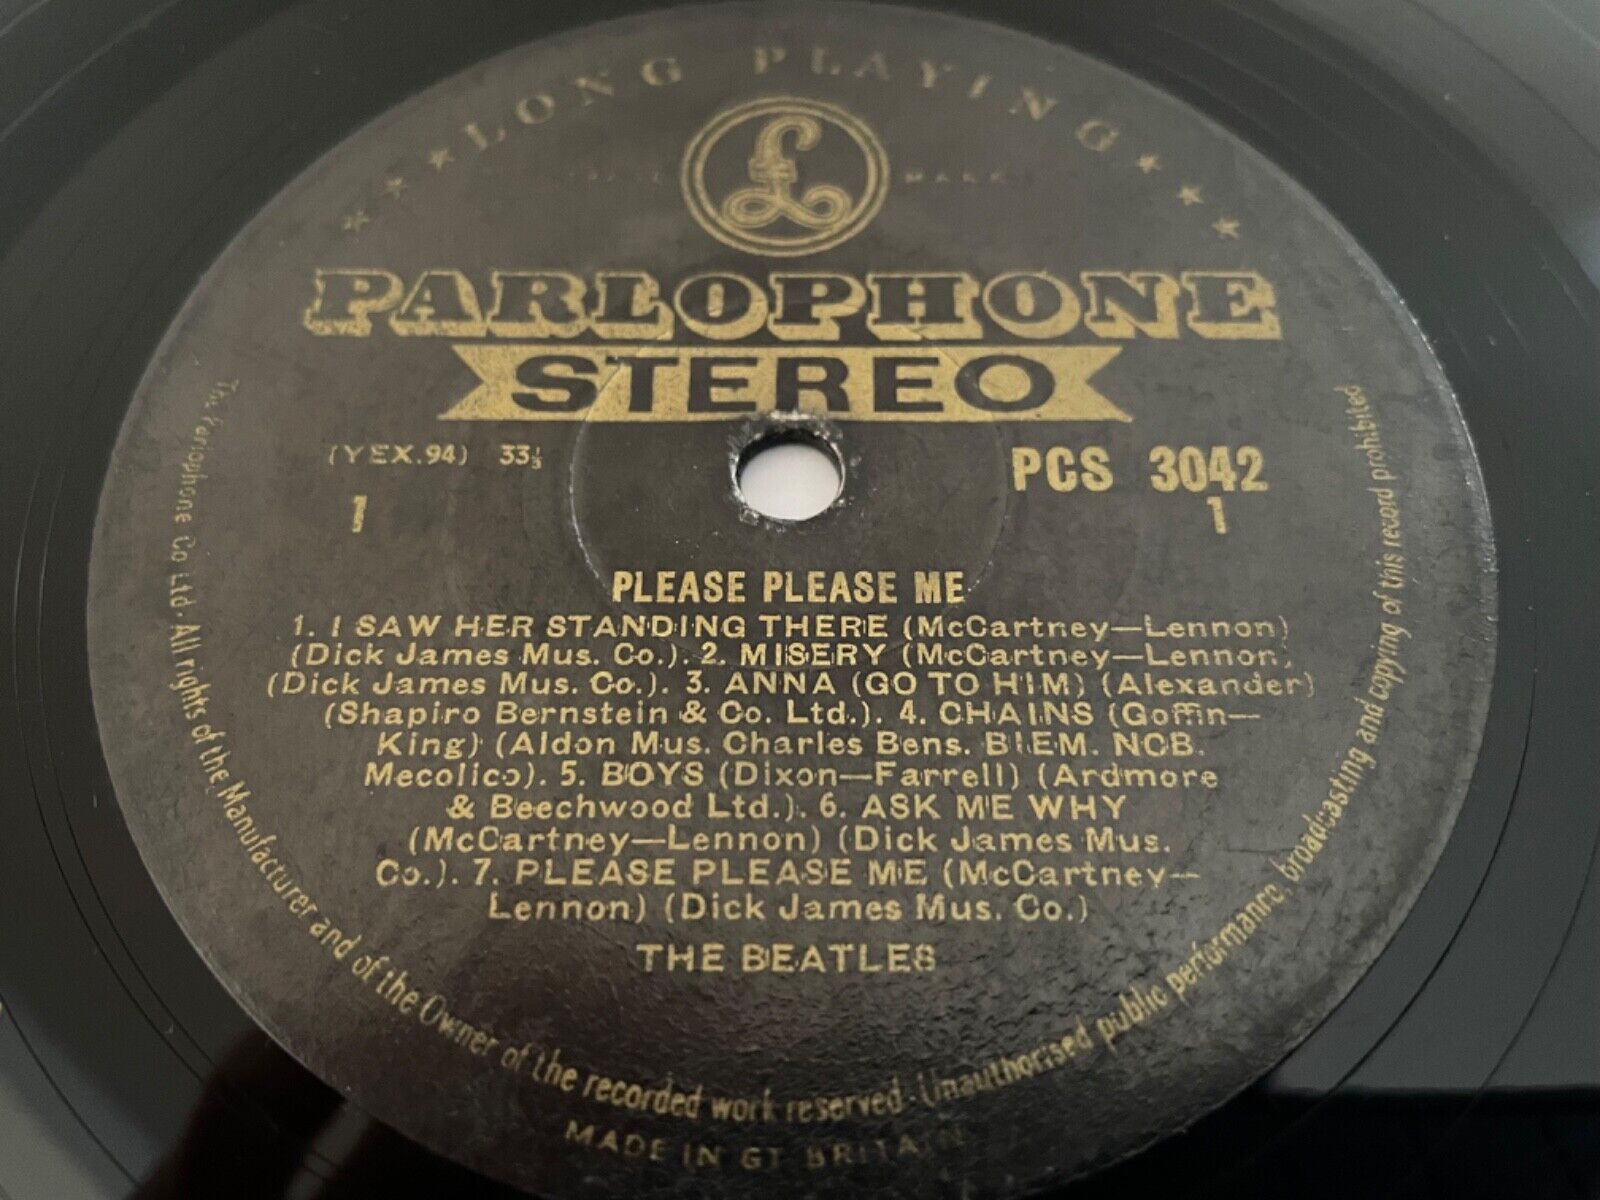 Beatles Please Please Me 1963 STEREO Black and Gold Dick James pressing